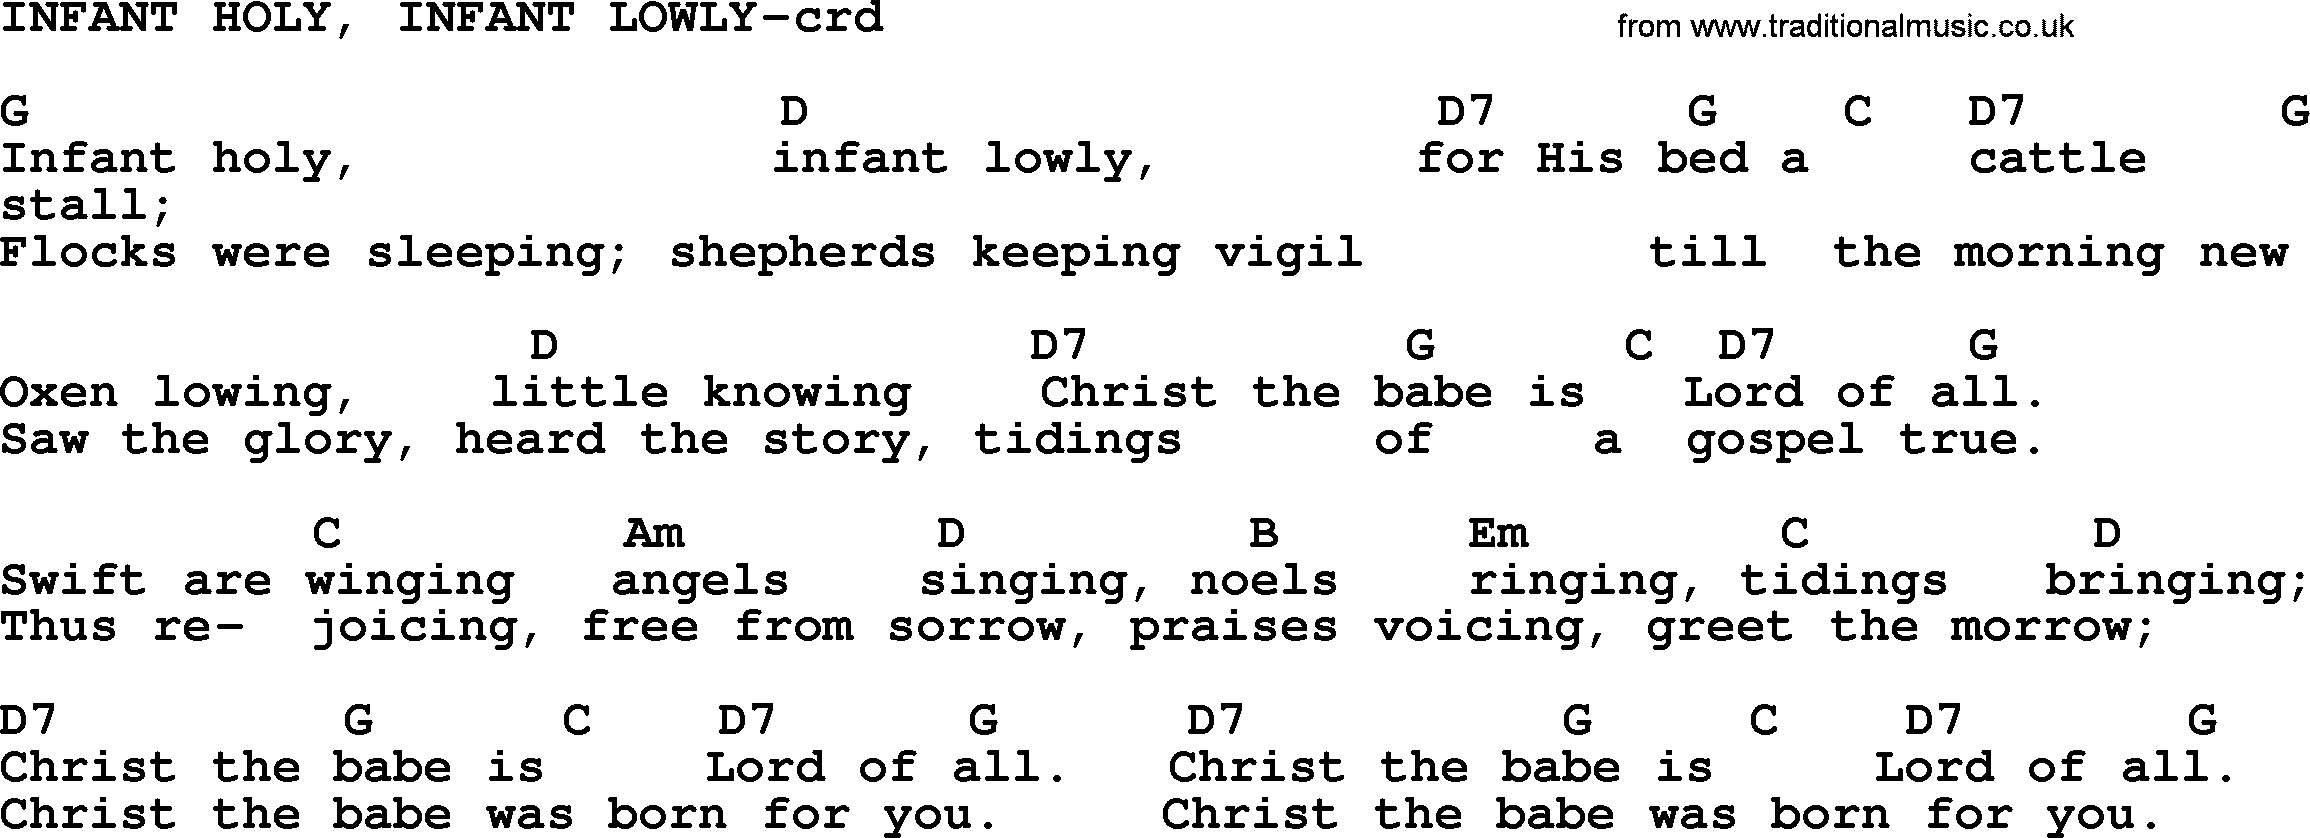 Top 500 Hymn: Infant Holy, Infant Lowly, lyrics and chords